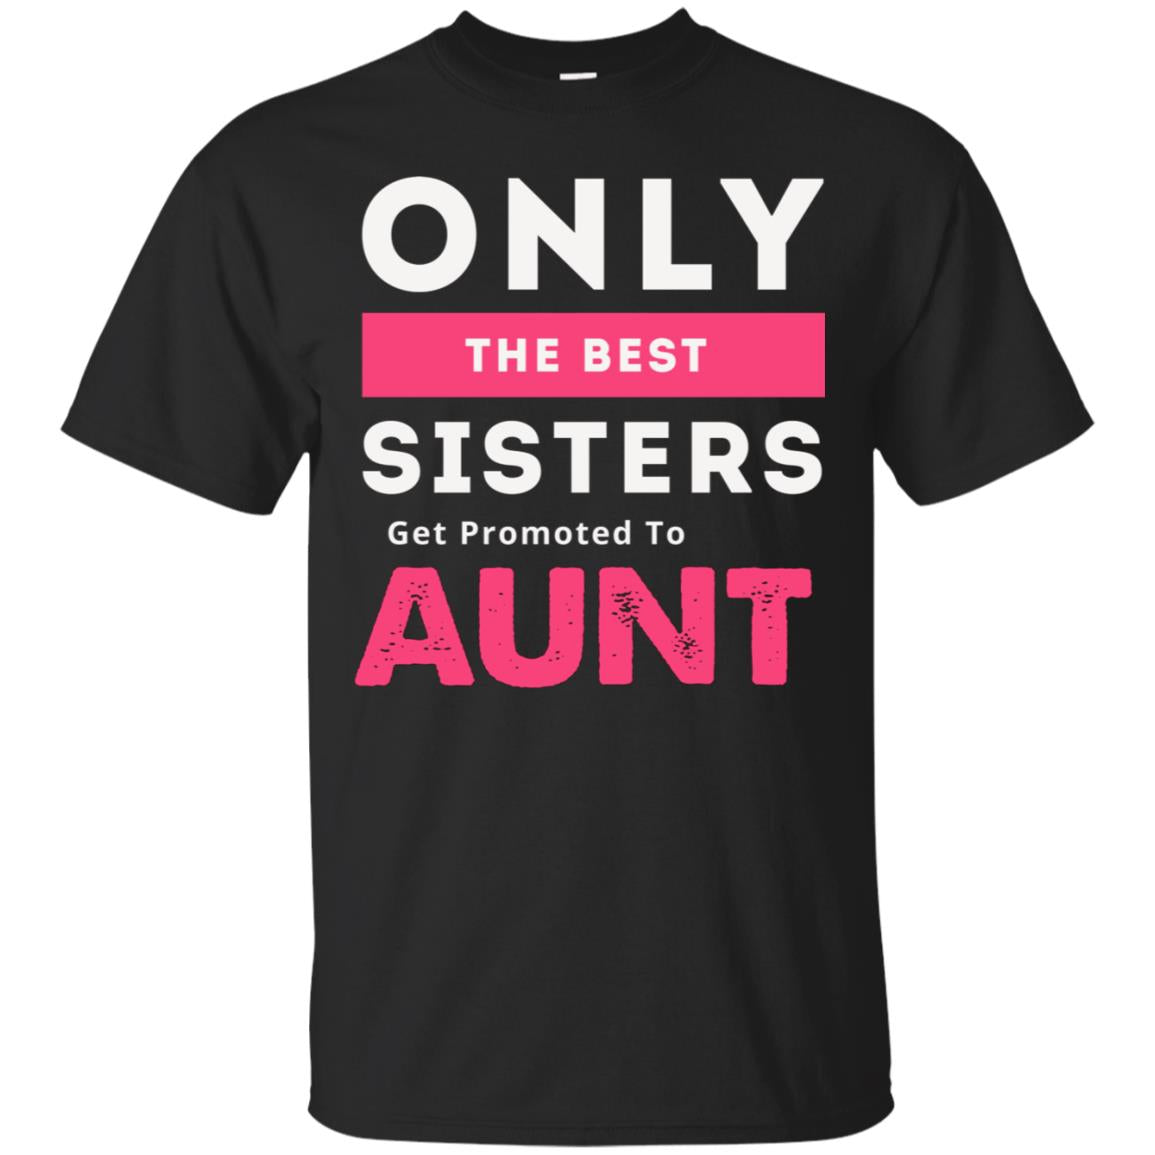 Funny Aunt Shirt Funny Aunt Shirt Only The B